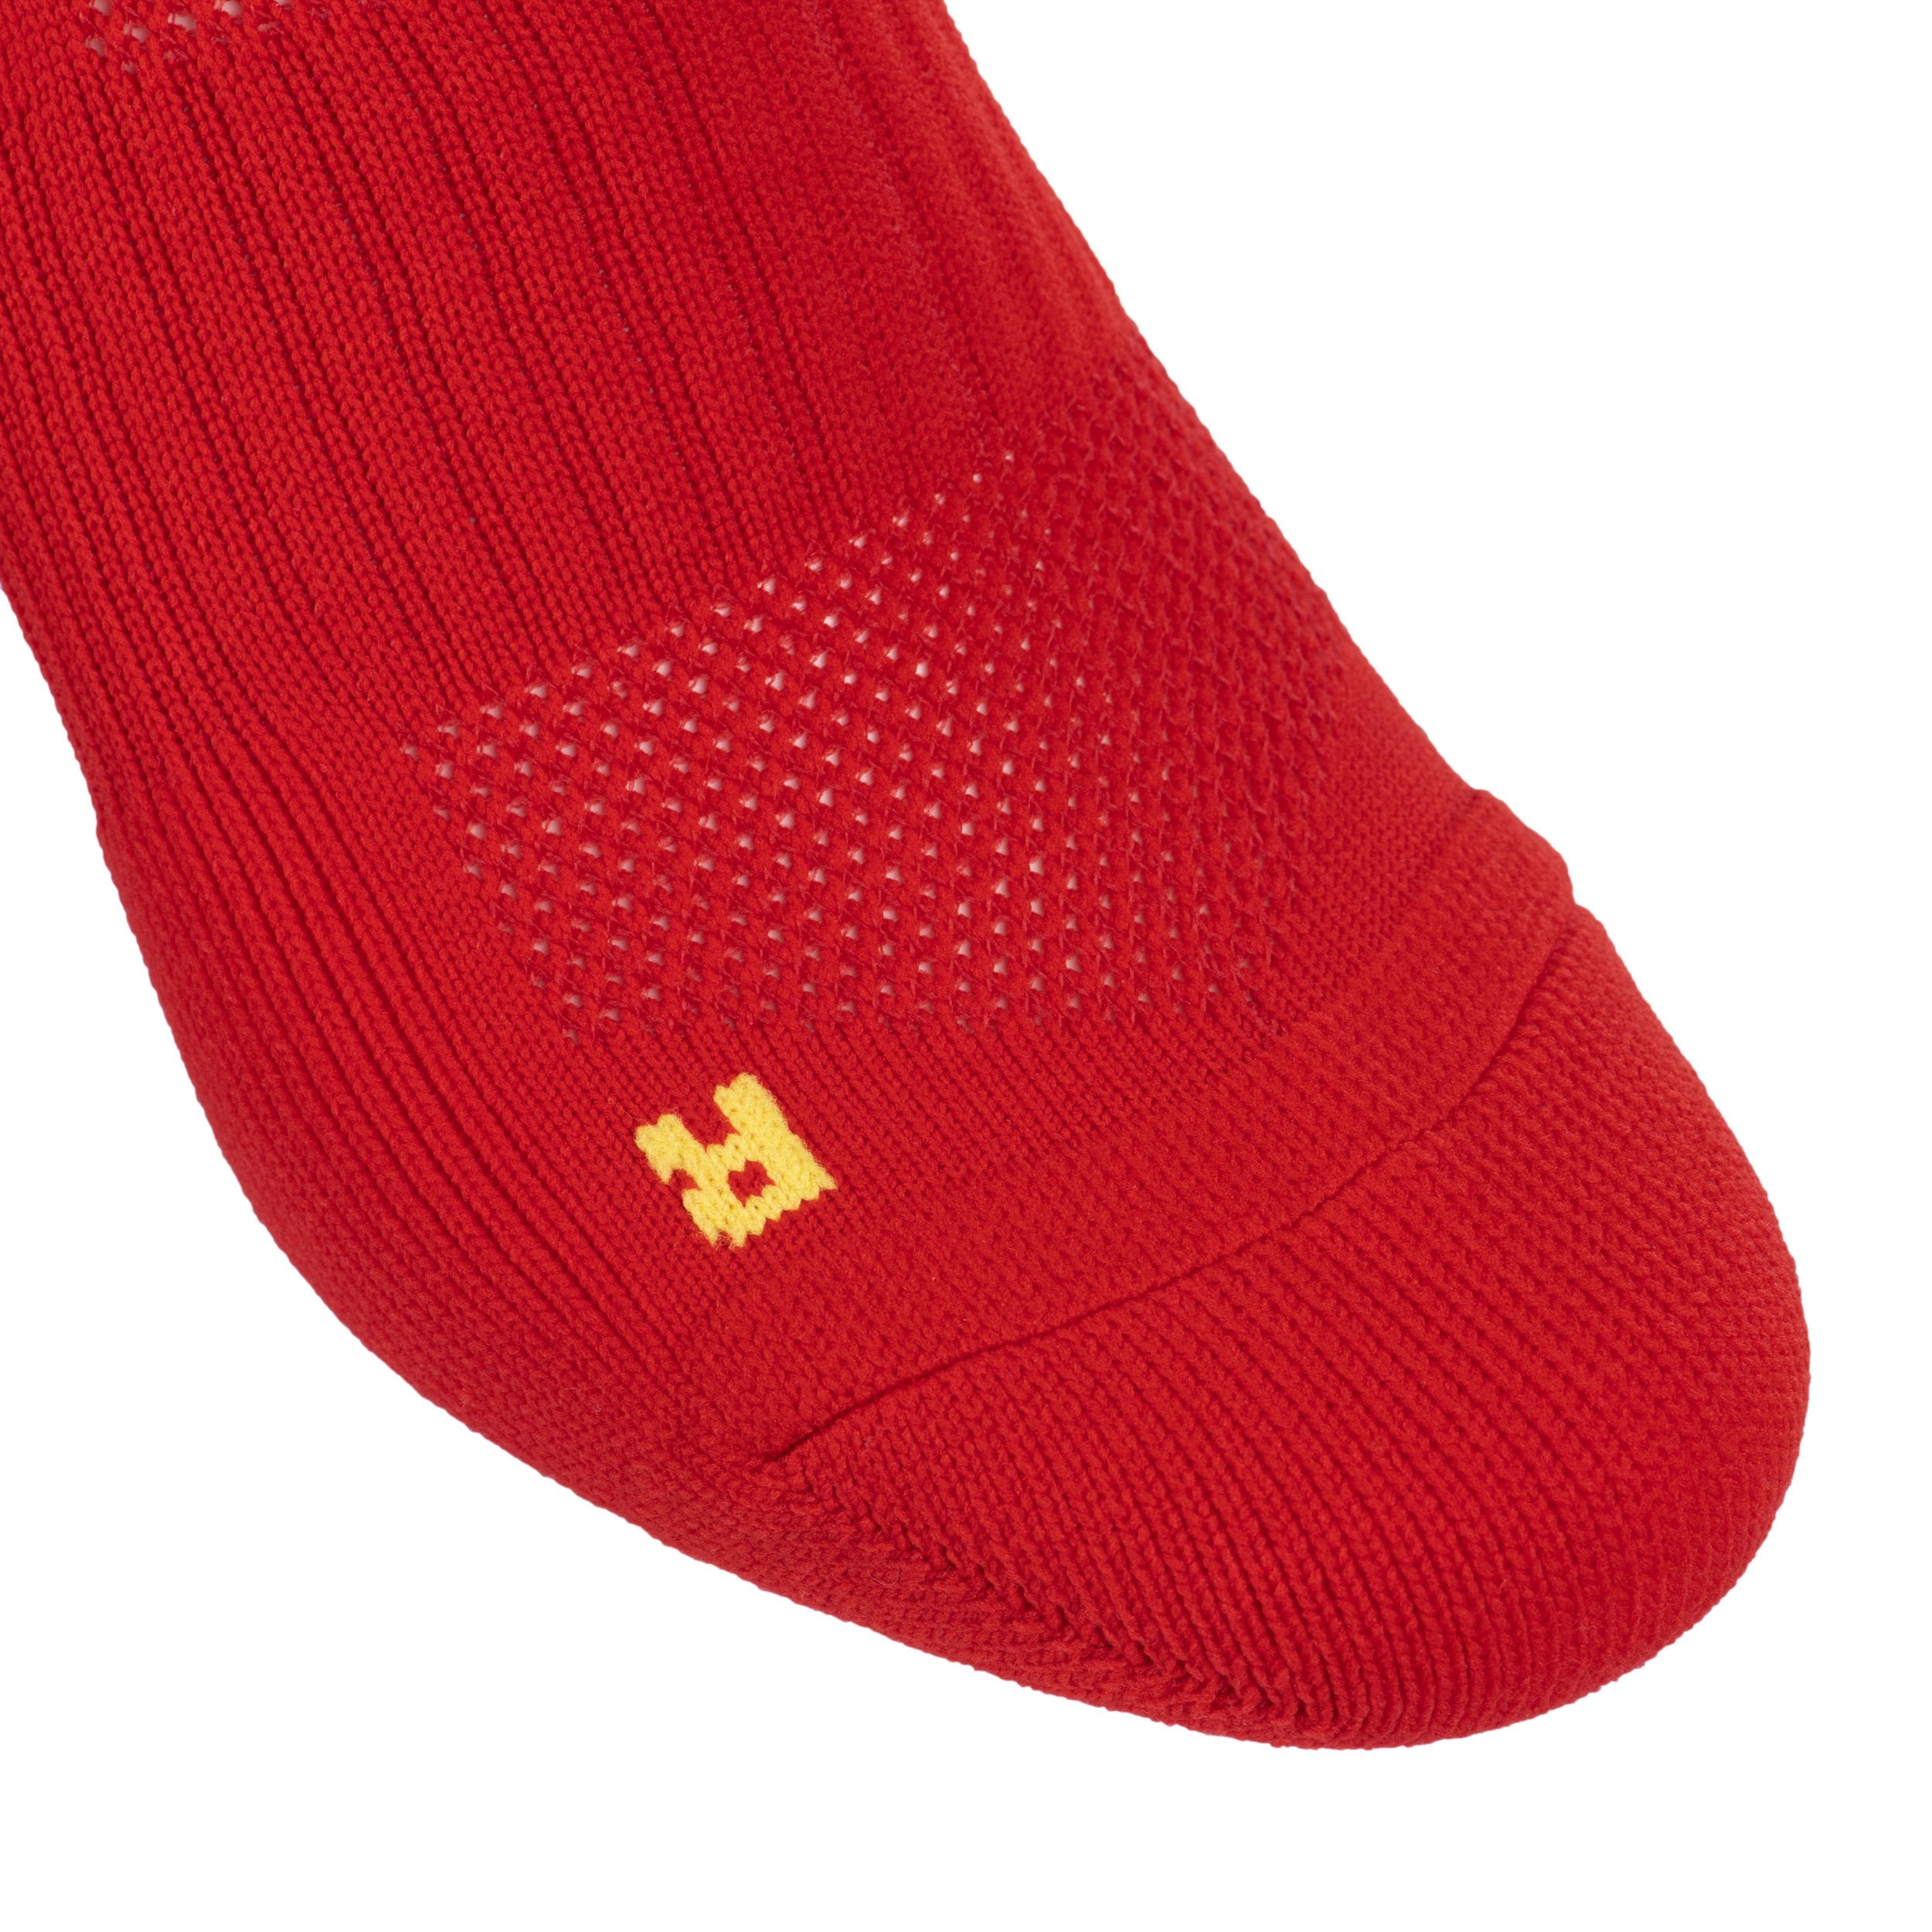 Men's/Women's High Rugby Socks R500 - Red/Yellow 4/5